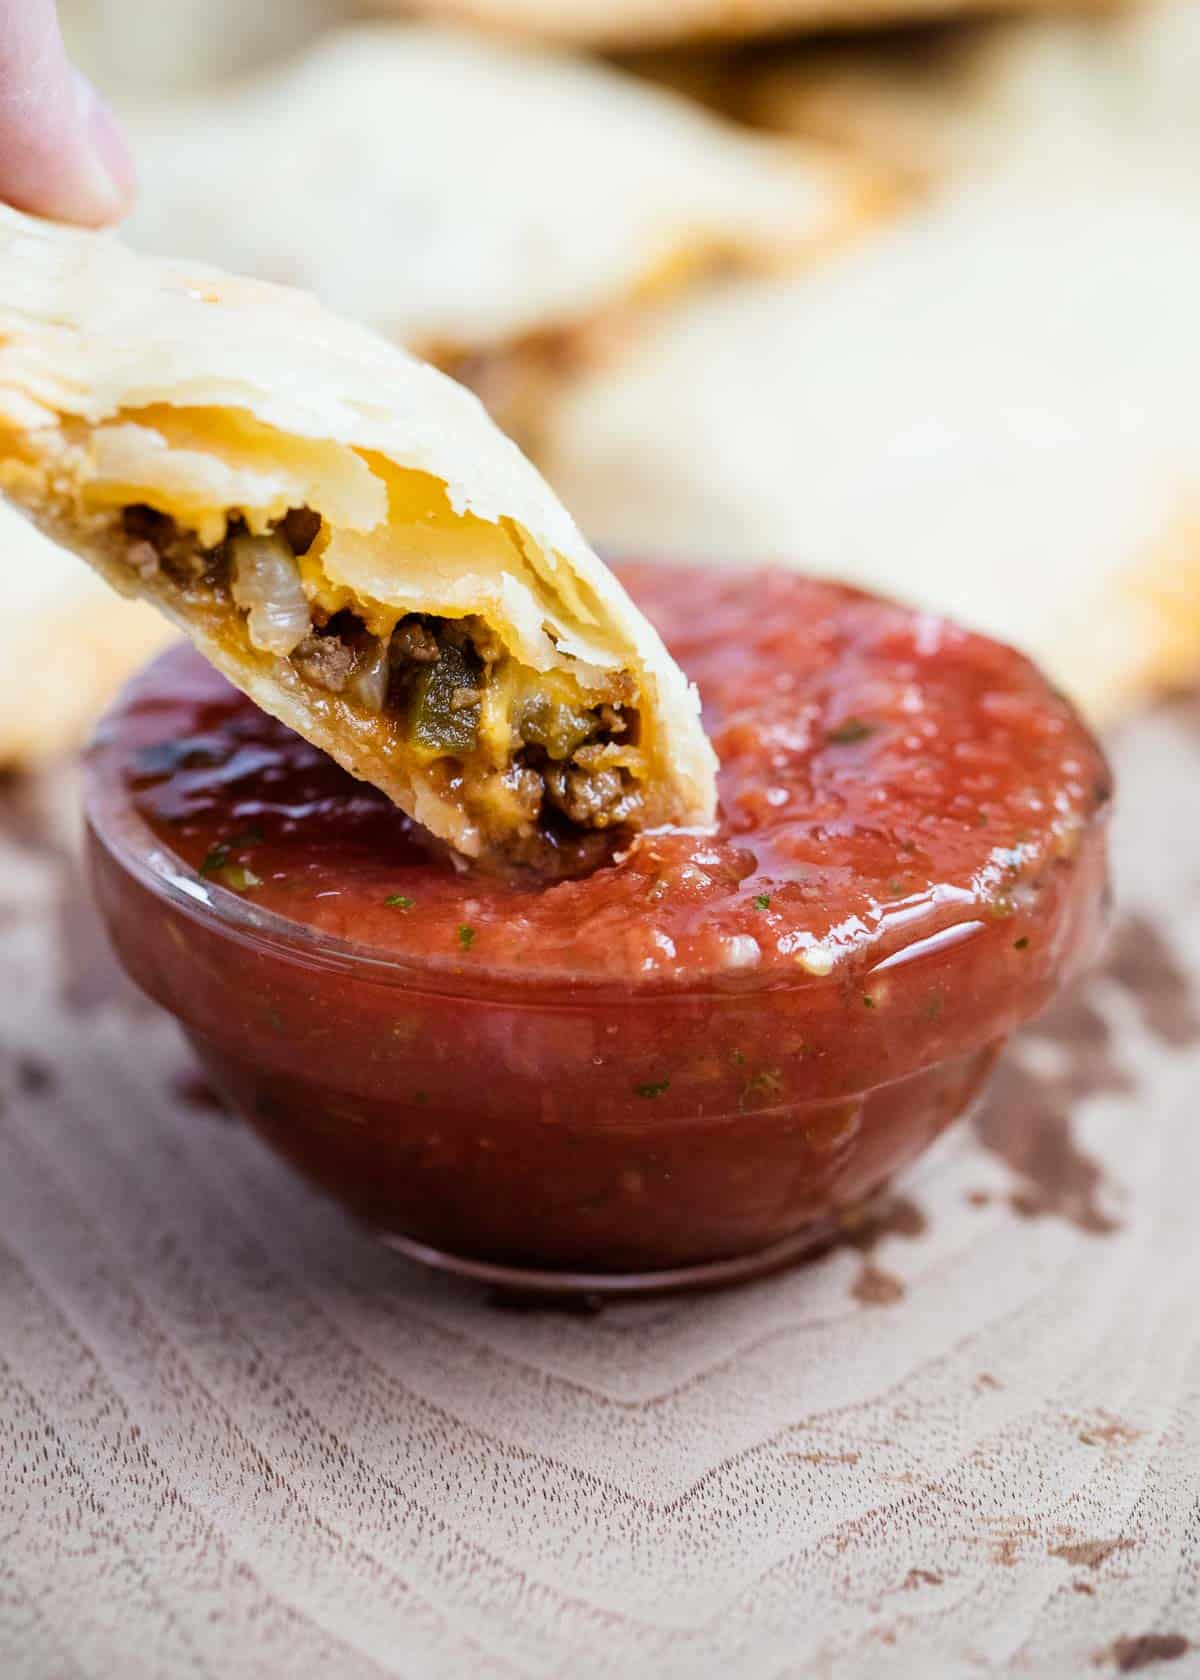 Dipping taco pocket in salsa.